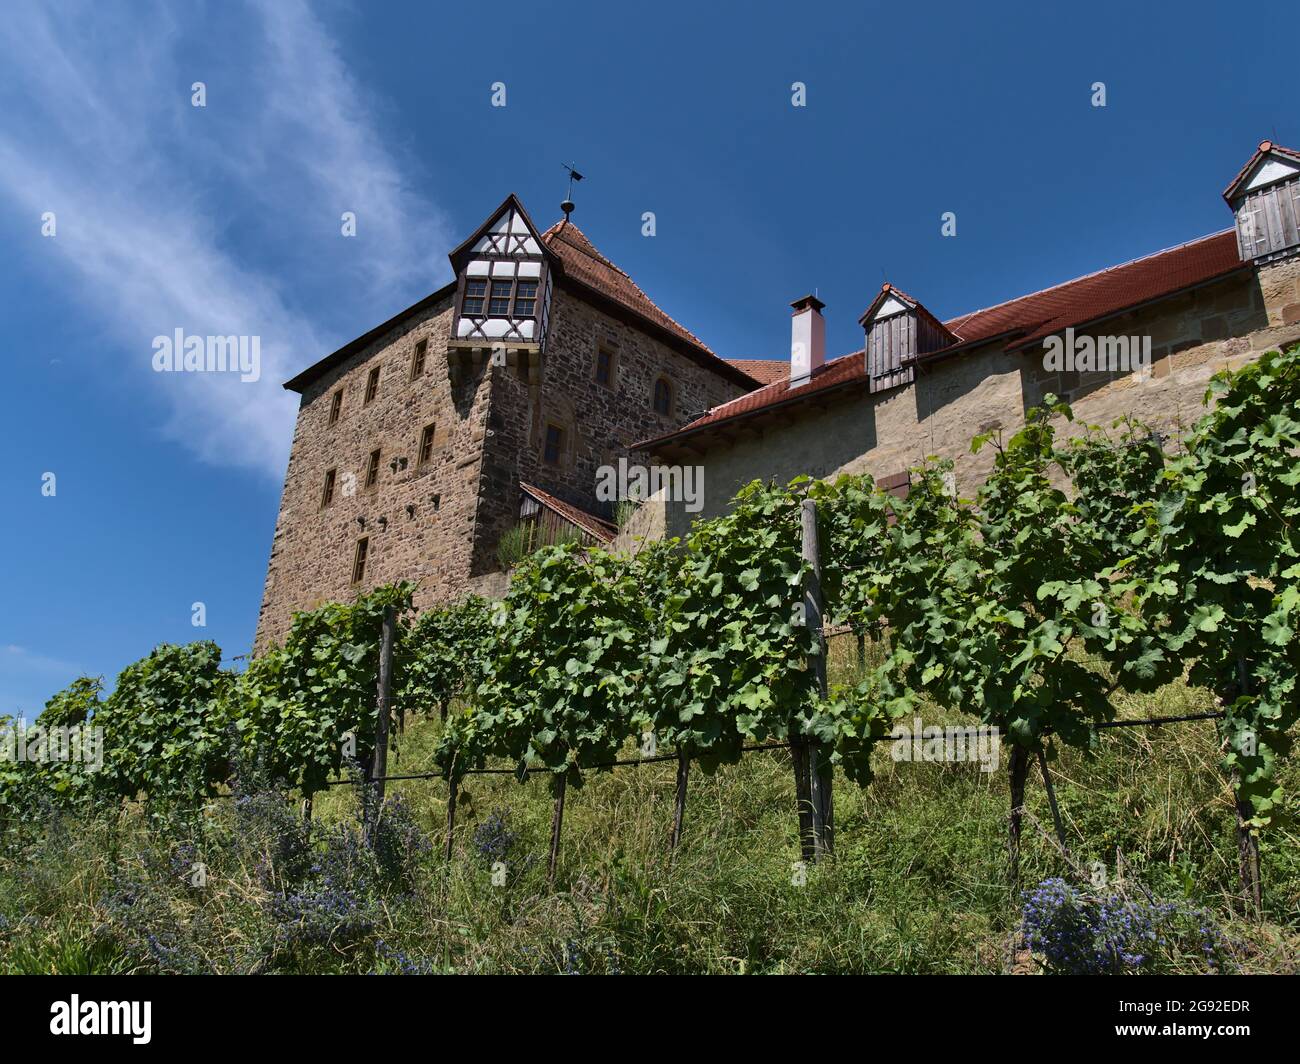 Low angle view of historic castle Burg Wildeck (built ca. 12th century) with stone wall in Abstatt, Baden-Württemberg, Germany on sunny summer day. Stock Photo